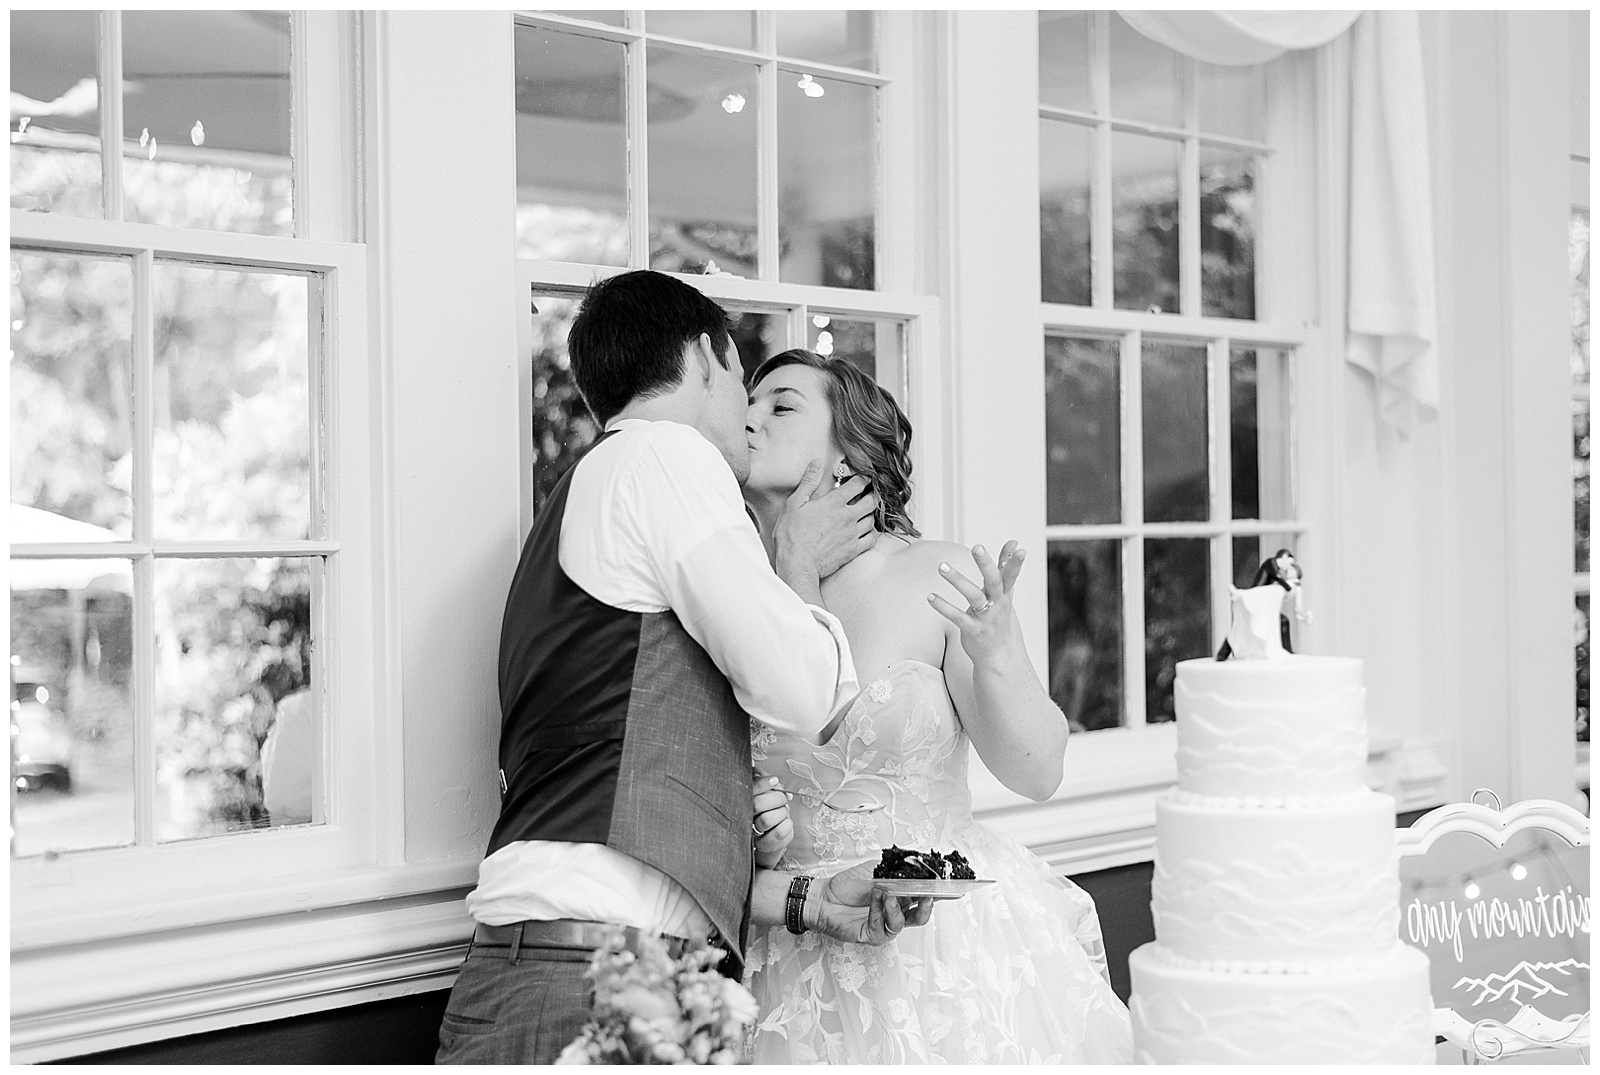 Bride and groom cut the cake at Outdoorsy Summer Wedding at North Carolina Lakehouse in the Mountains | check out the full wedding at KevynDixonPhoto.com